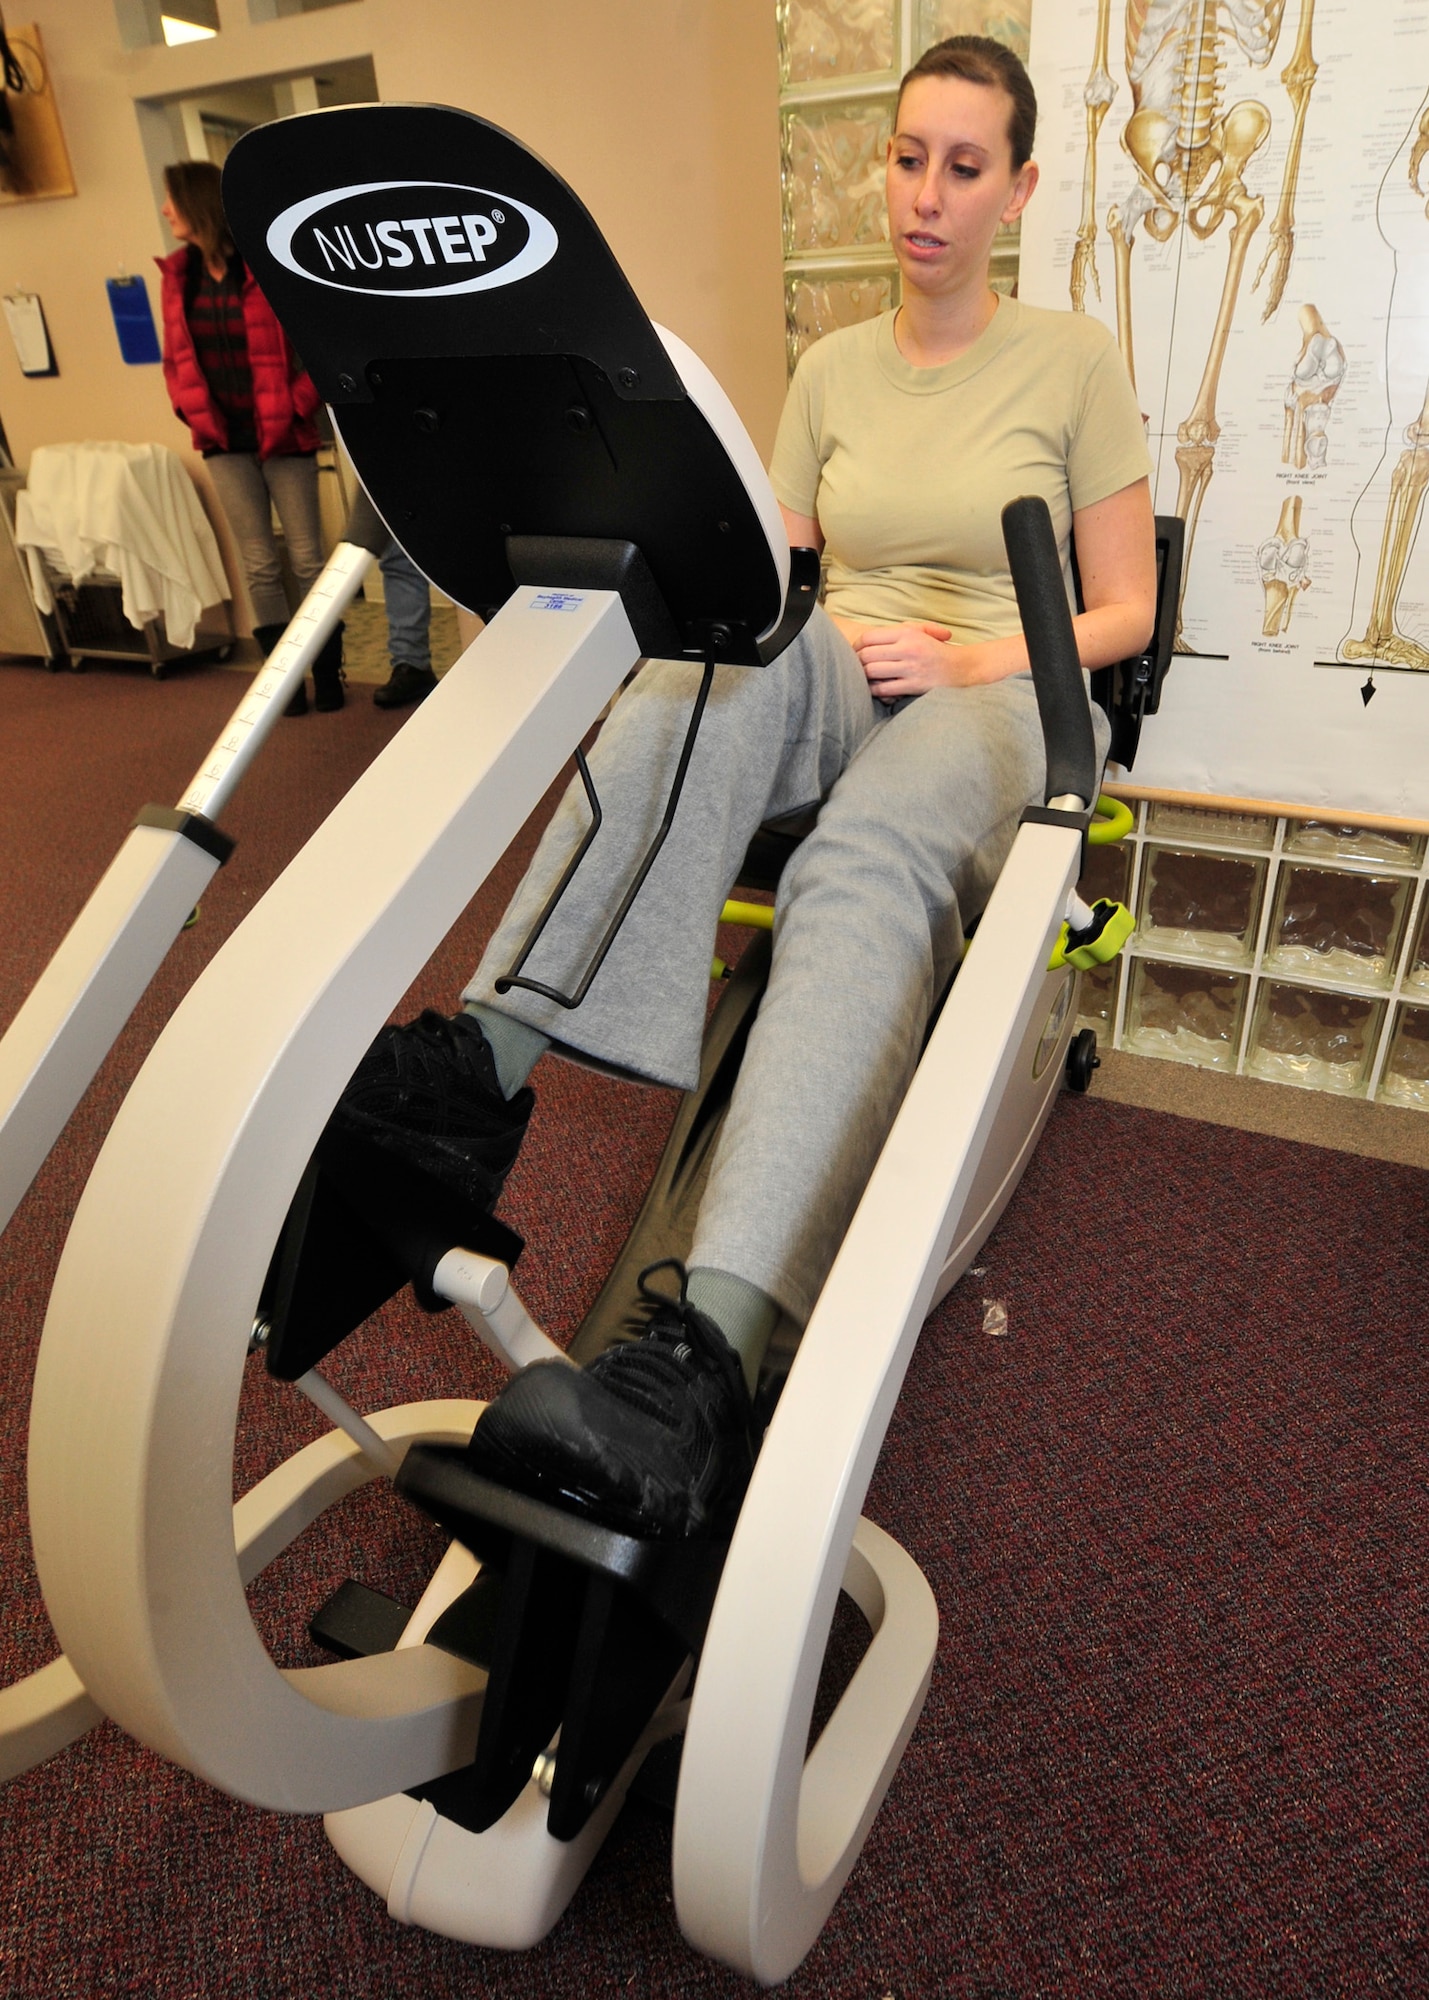 Airman 1st Class Lori Cord pedals a stationary bike Feb. 1, 2013, at the Bay Health Physical Therapy Center in Dover, Del. Biking is one of the activities that will help strengthen Cord’s leg from the affects of Guillain-Barre Syndrome. (U.S. Air Force photo by Tech. Sgt. Chuck Walker)